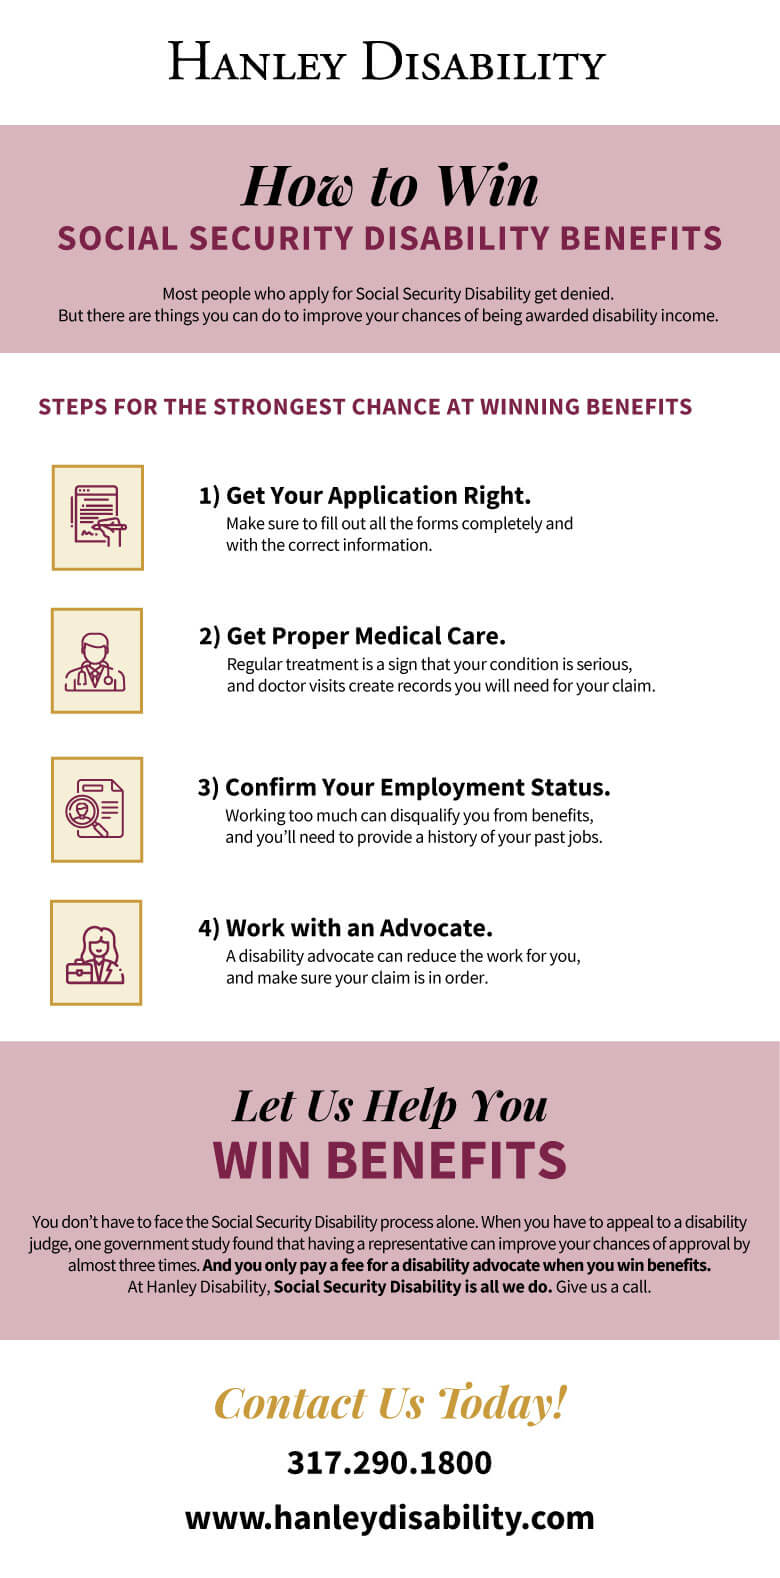 How to Win Social Security Disability Benefits